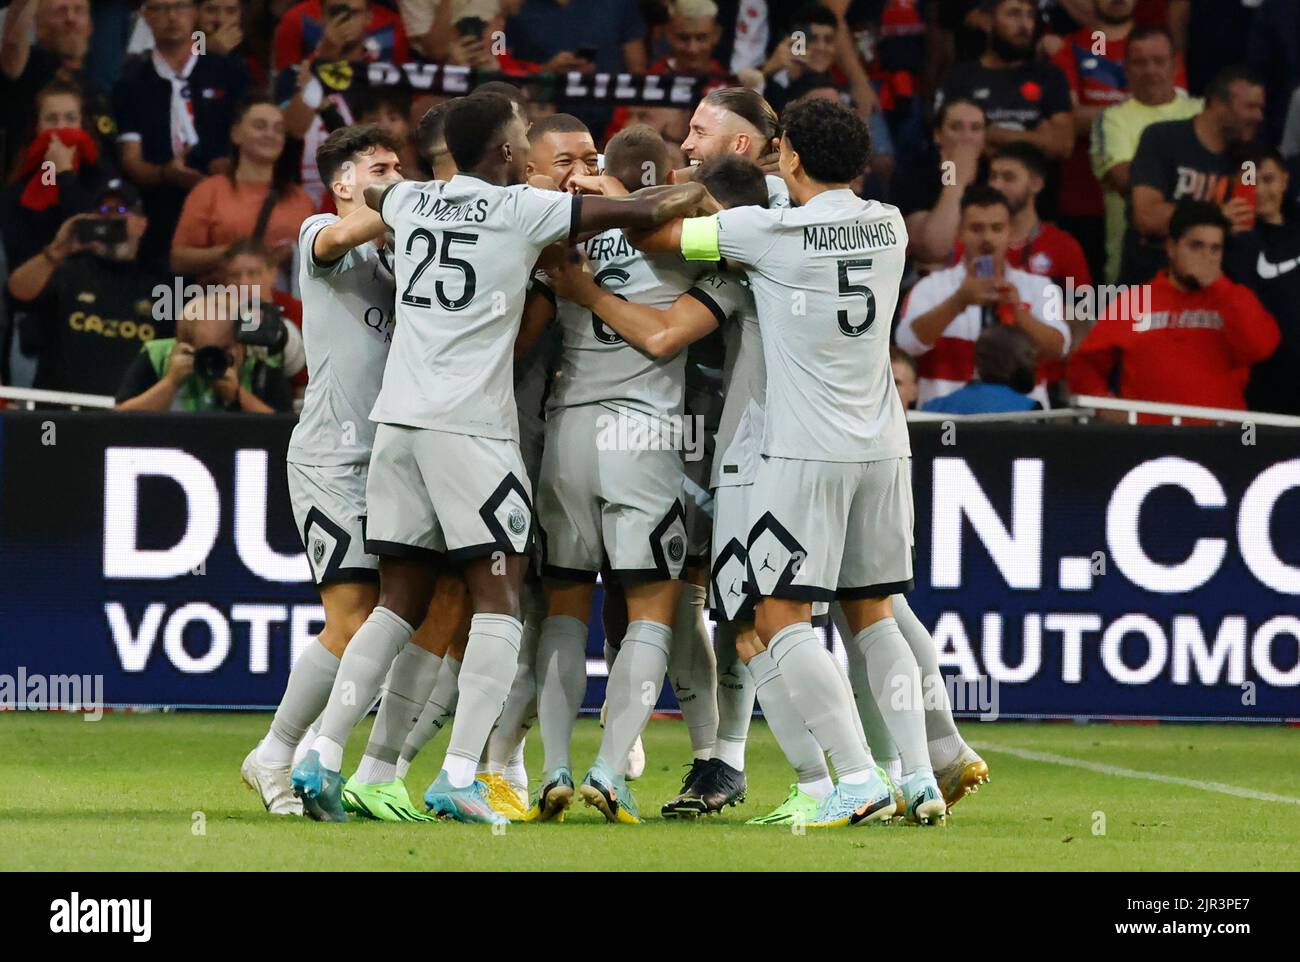 Lille, France. 21st Aug, 2022. Paris Saint-Germain's players celebrate after scoring during a French Ligue 1 football match between Lille and Paris Saint-Germain (PSG) at Stade Pierre-Mauroy in Villeneuve-d'Asq, northern France, Aug. 21, 2022. Credit: Rit Heize/Xinhua/Alamy Live News Stock Photo